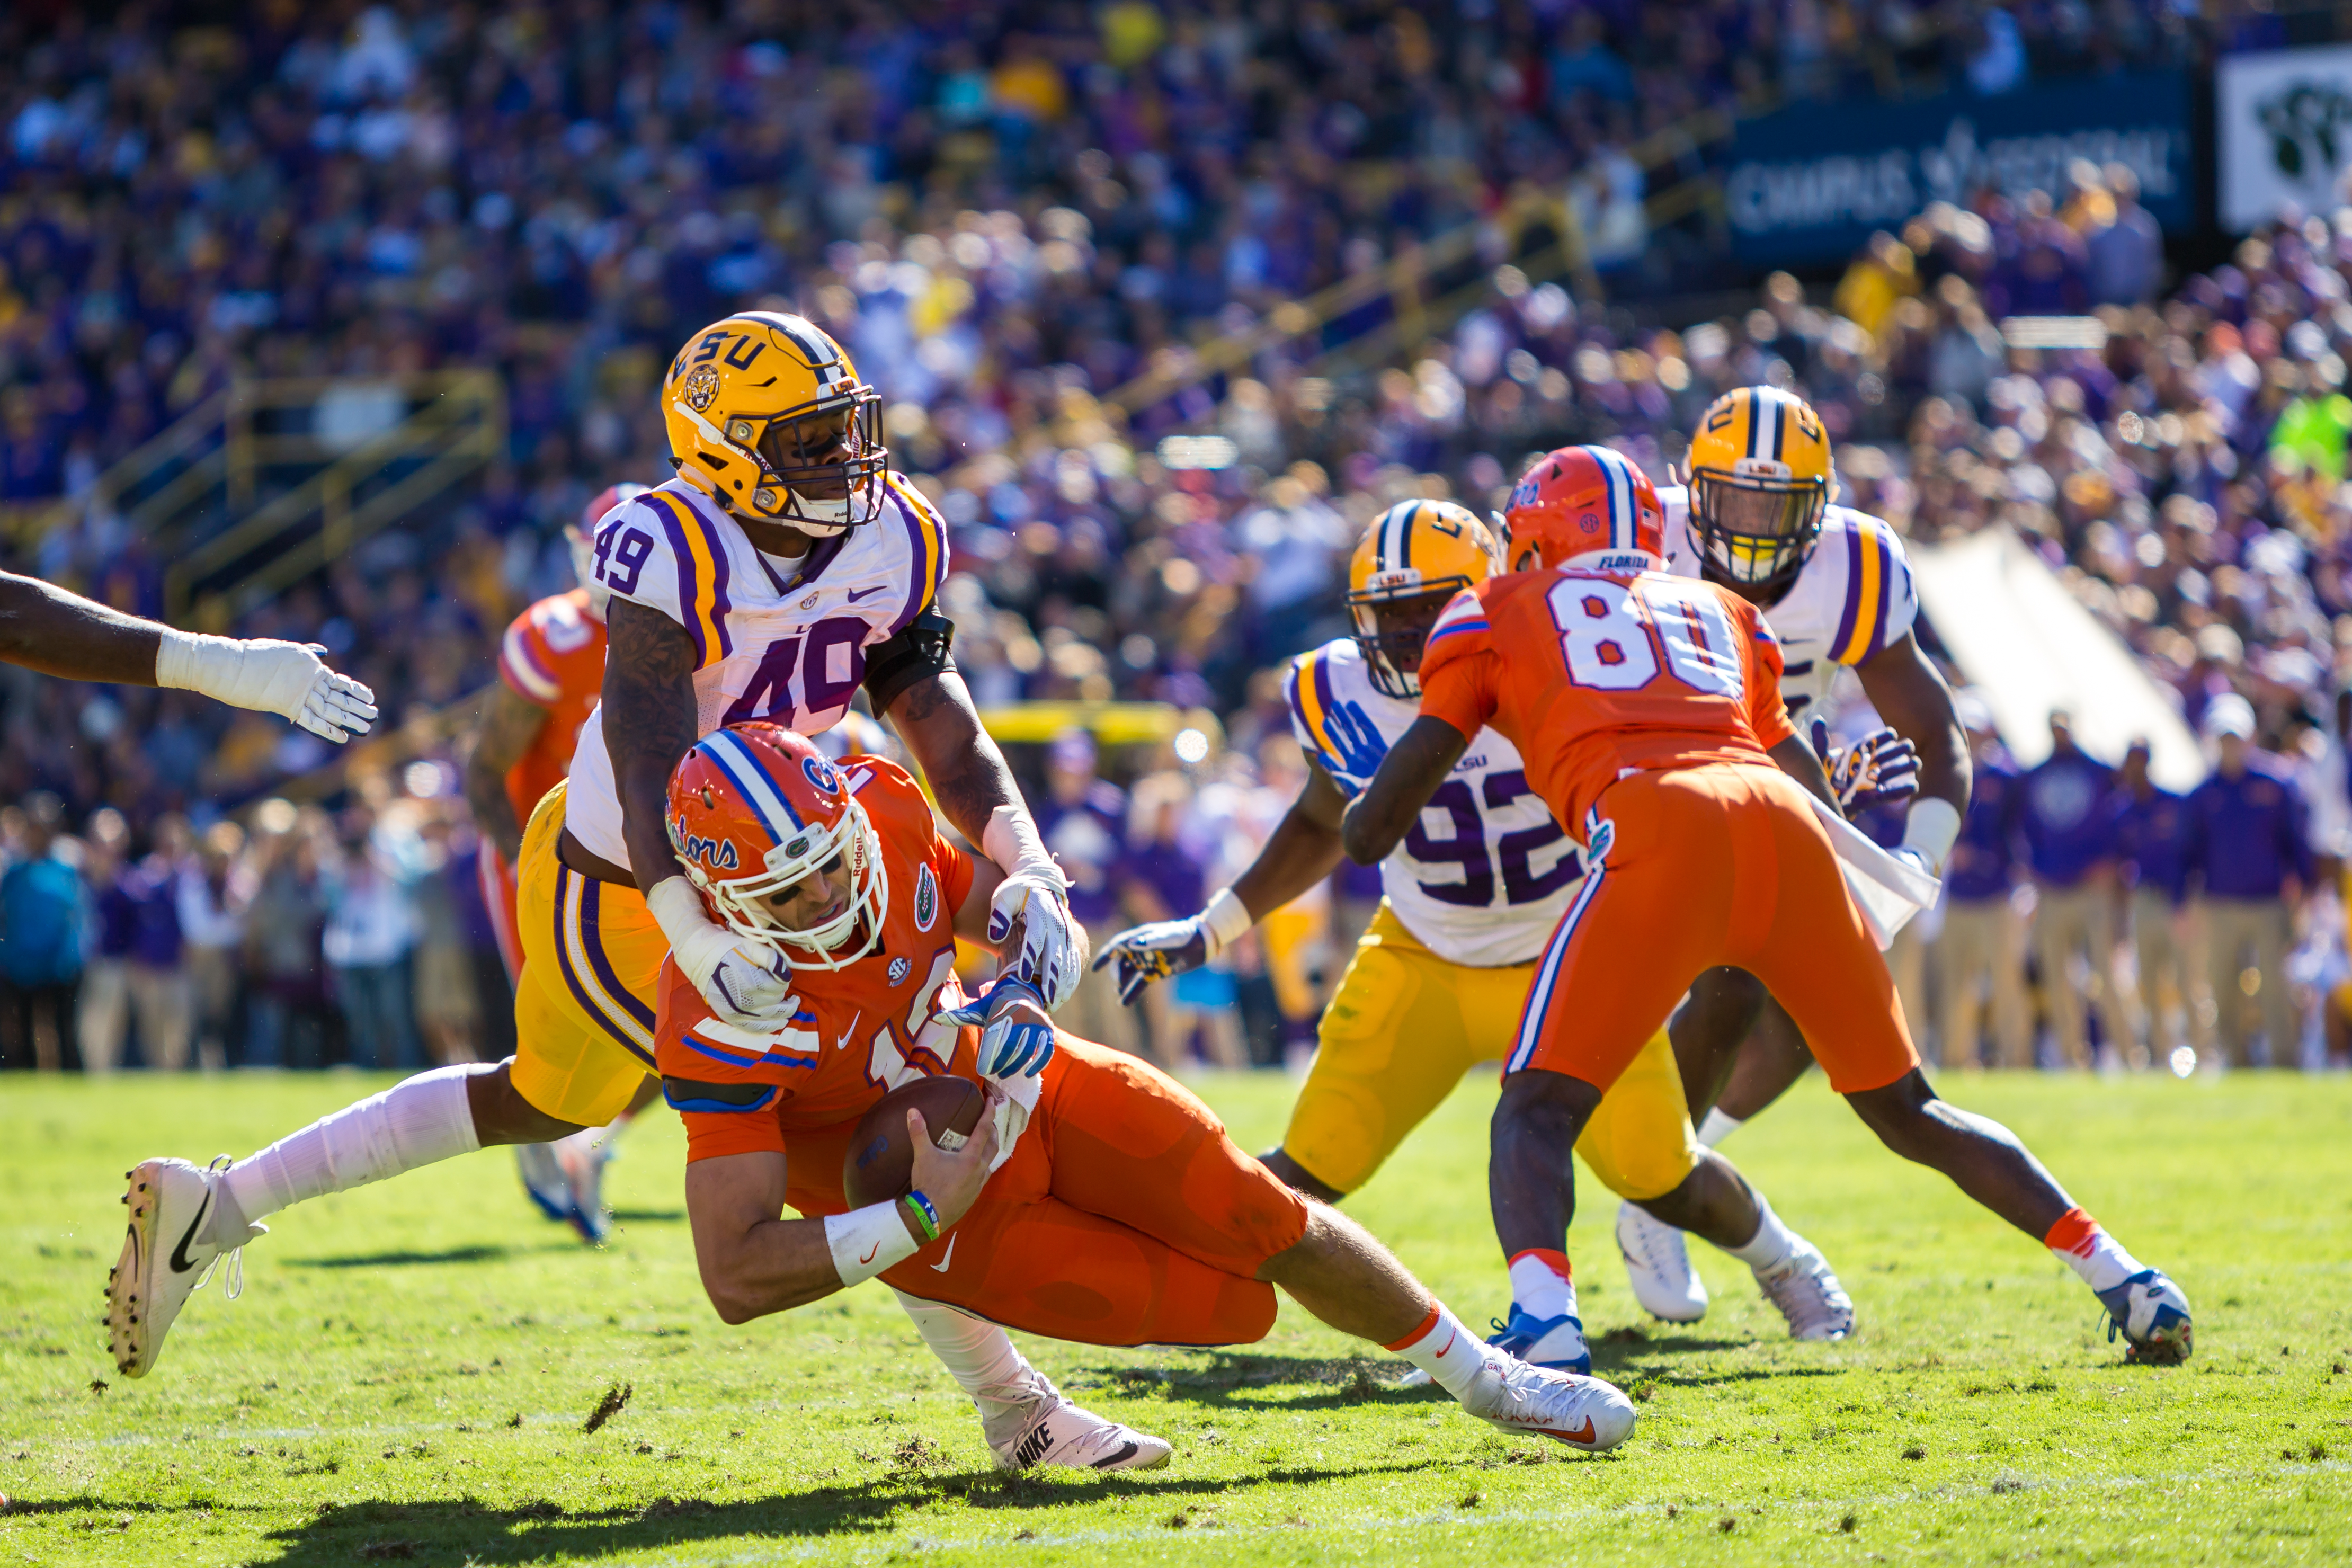 LSU’S KEY TO TAKE LEAVE FROM FOOTBALL FOR PERSONAL REASONS